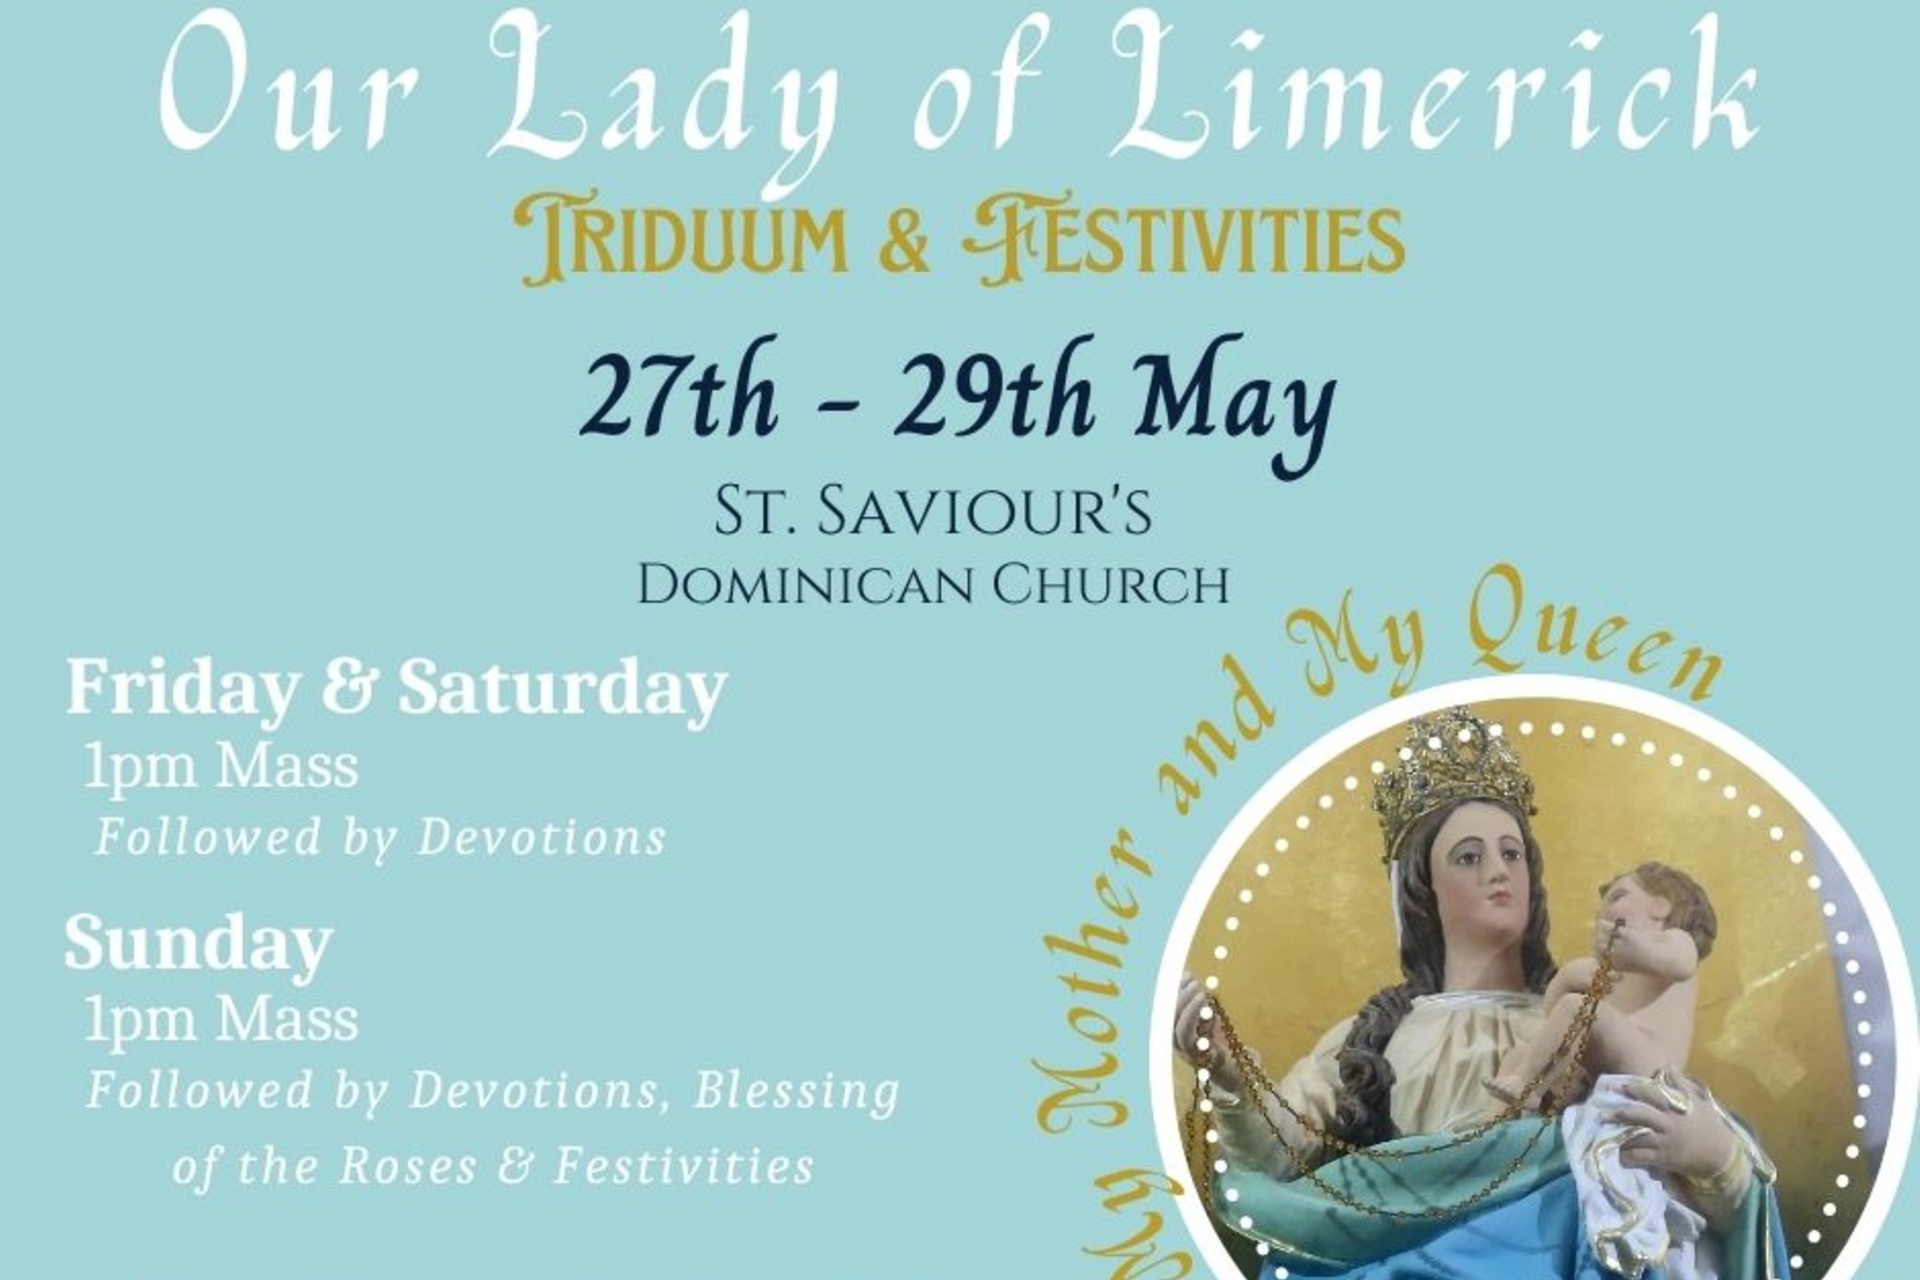 Our Lady of Limerick Triduum